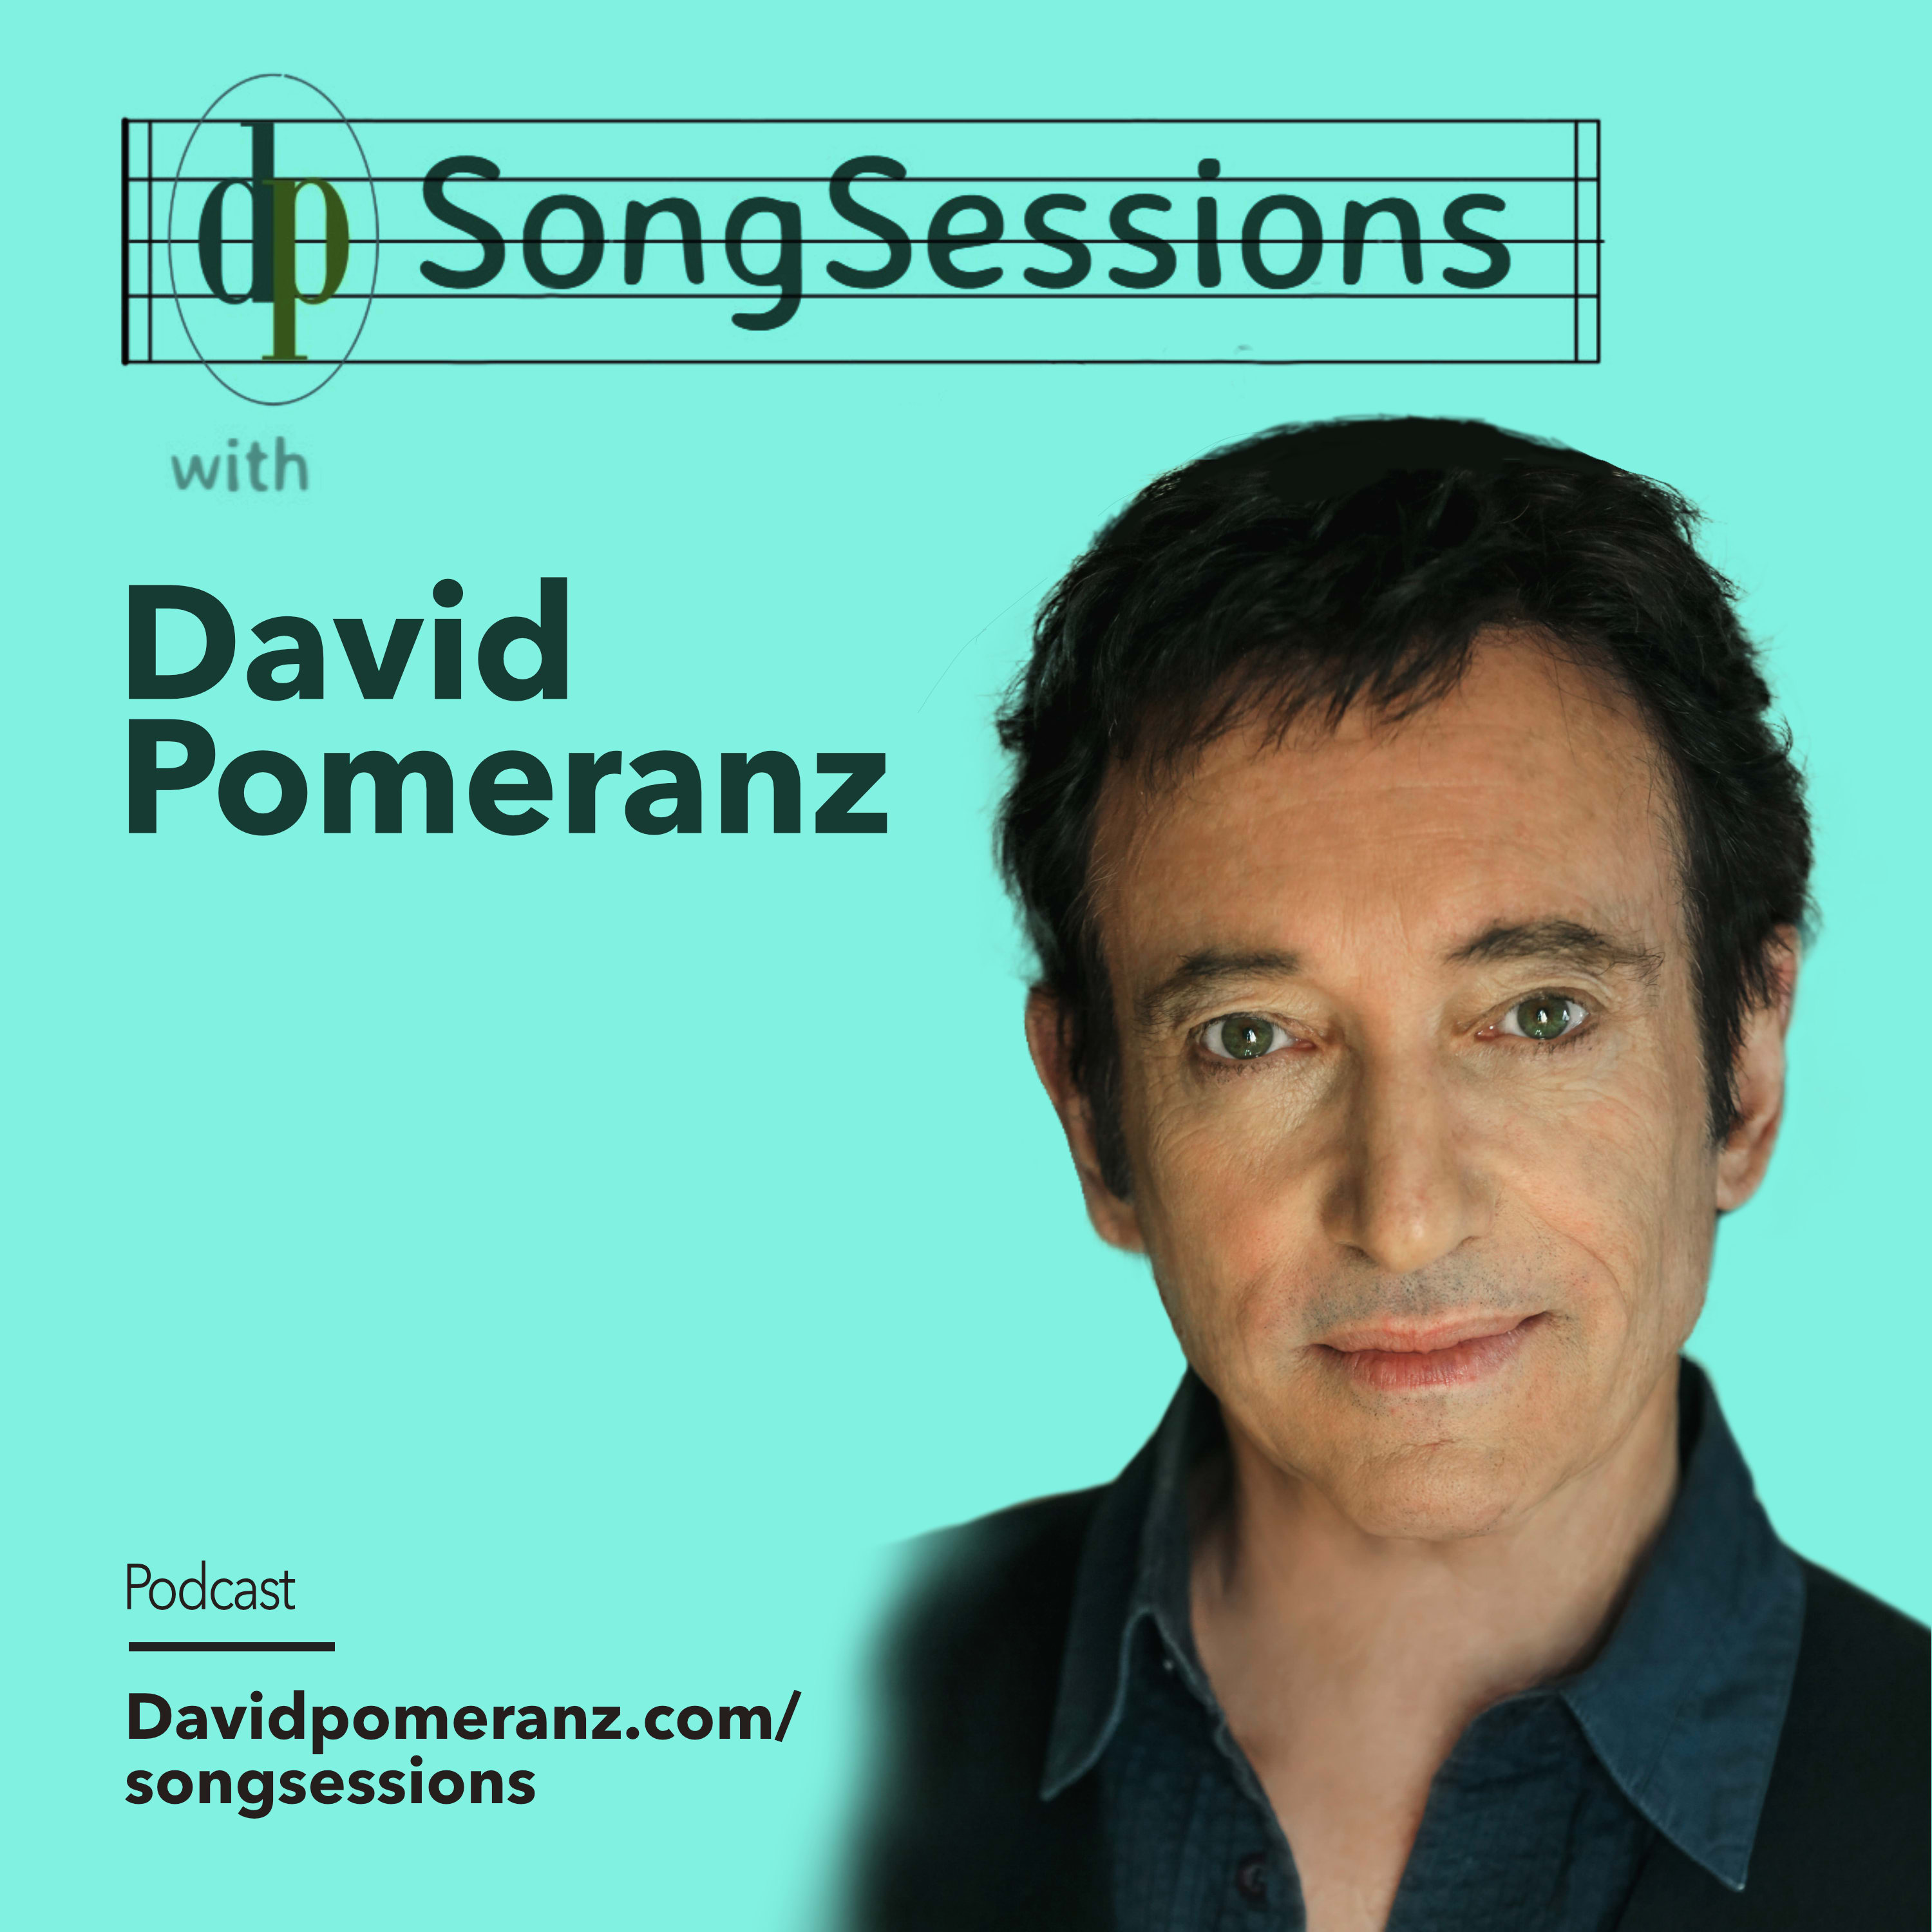 The SongSessions Podcast